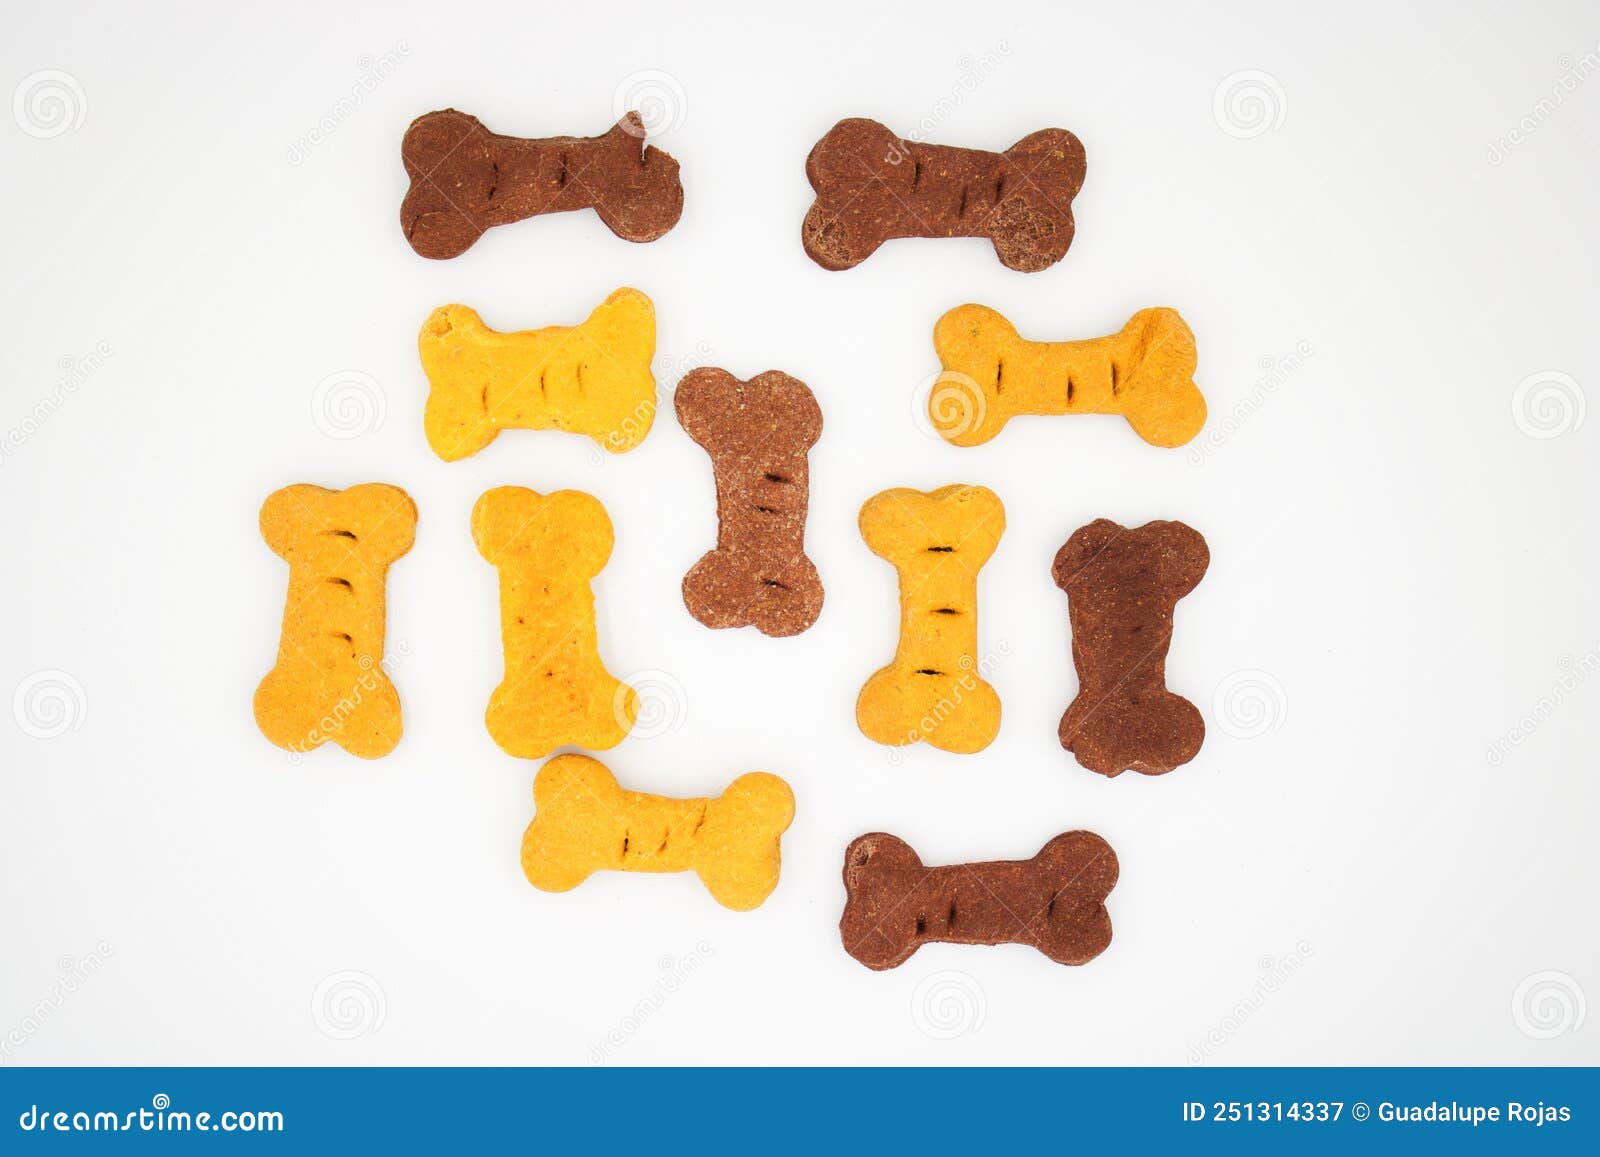 snack, or cookies or prize to give the dog, to reward good behavior